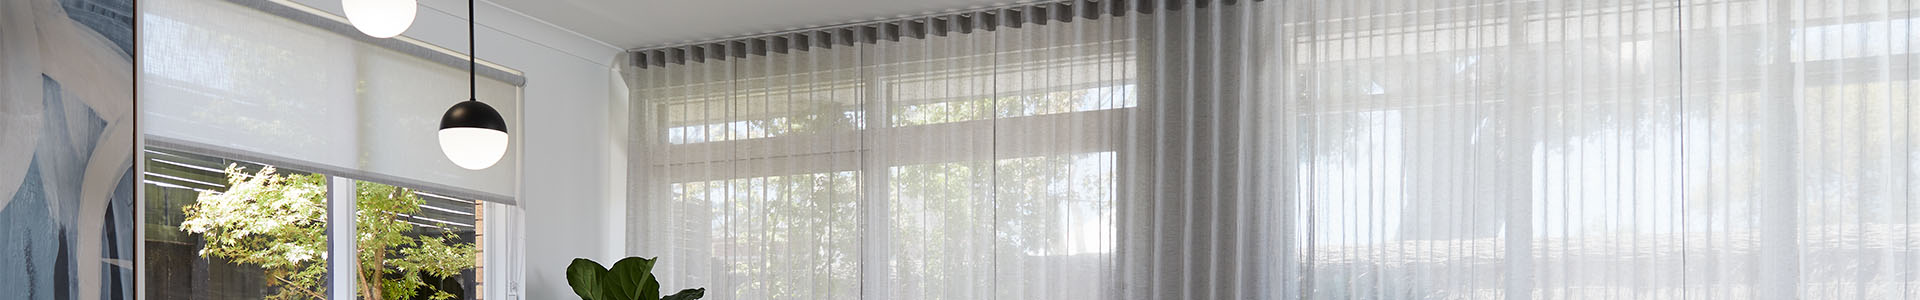 Made To Measure Curtains At Spotlight